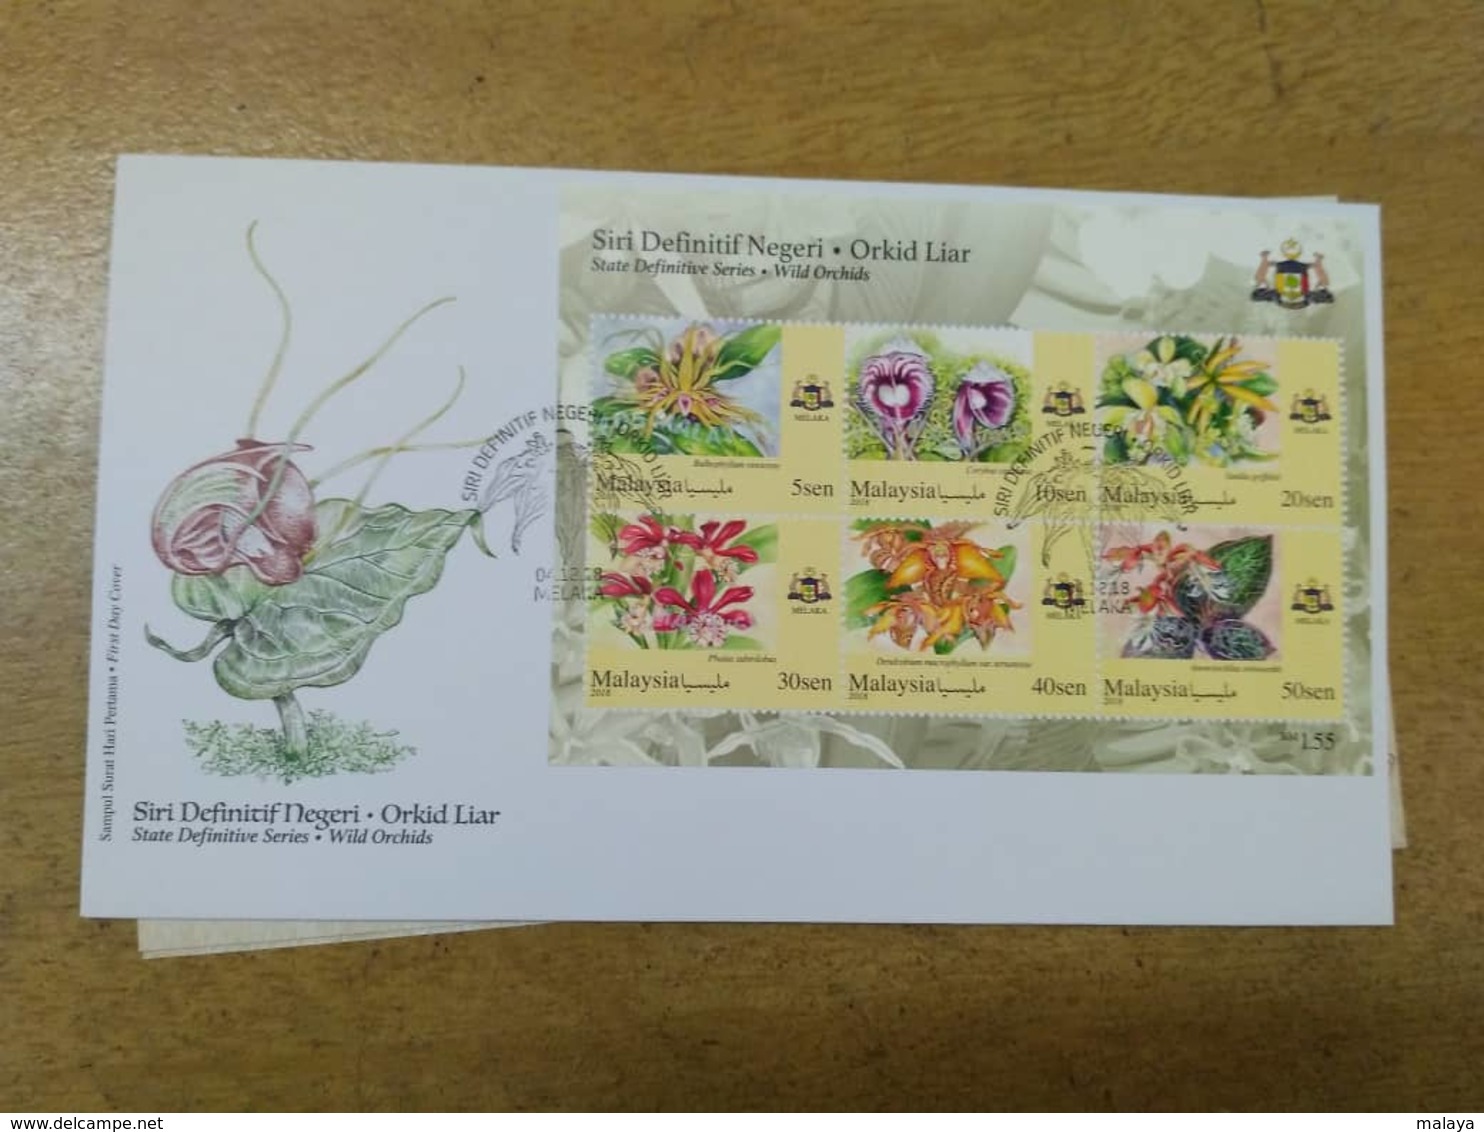 MALAYSIA 2018 FDC Cover Concordant WILD ORCHIDS Definitive States Series 14 MS Complete Sarawak Borneo Sabah Penang - Malaysia (1964-...)